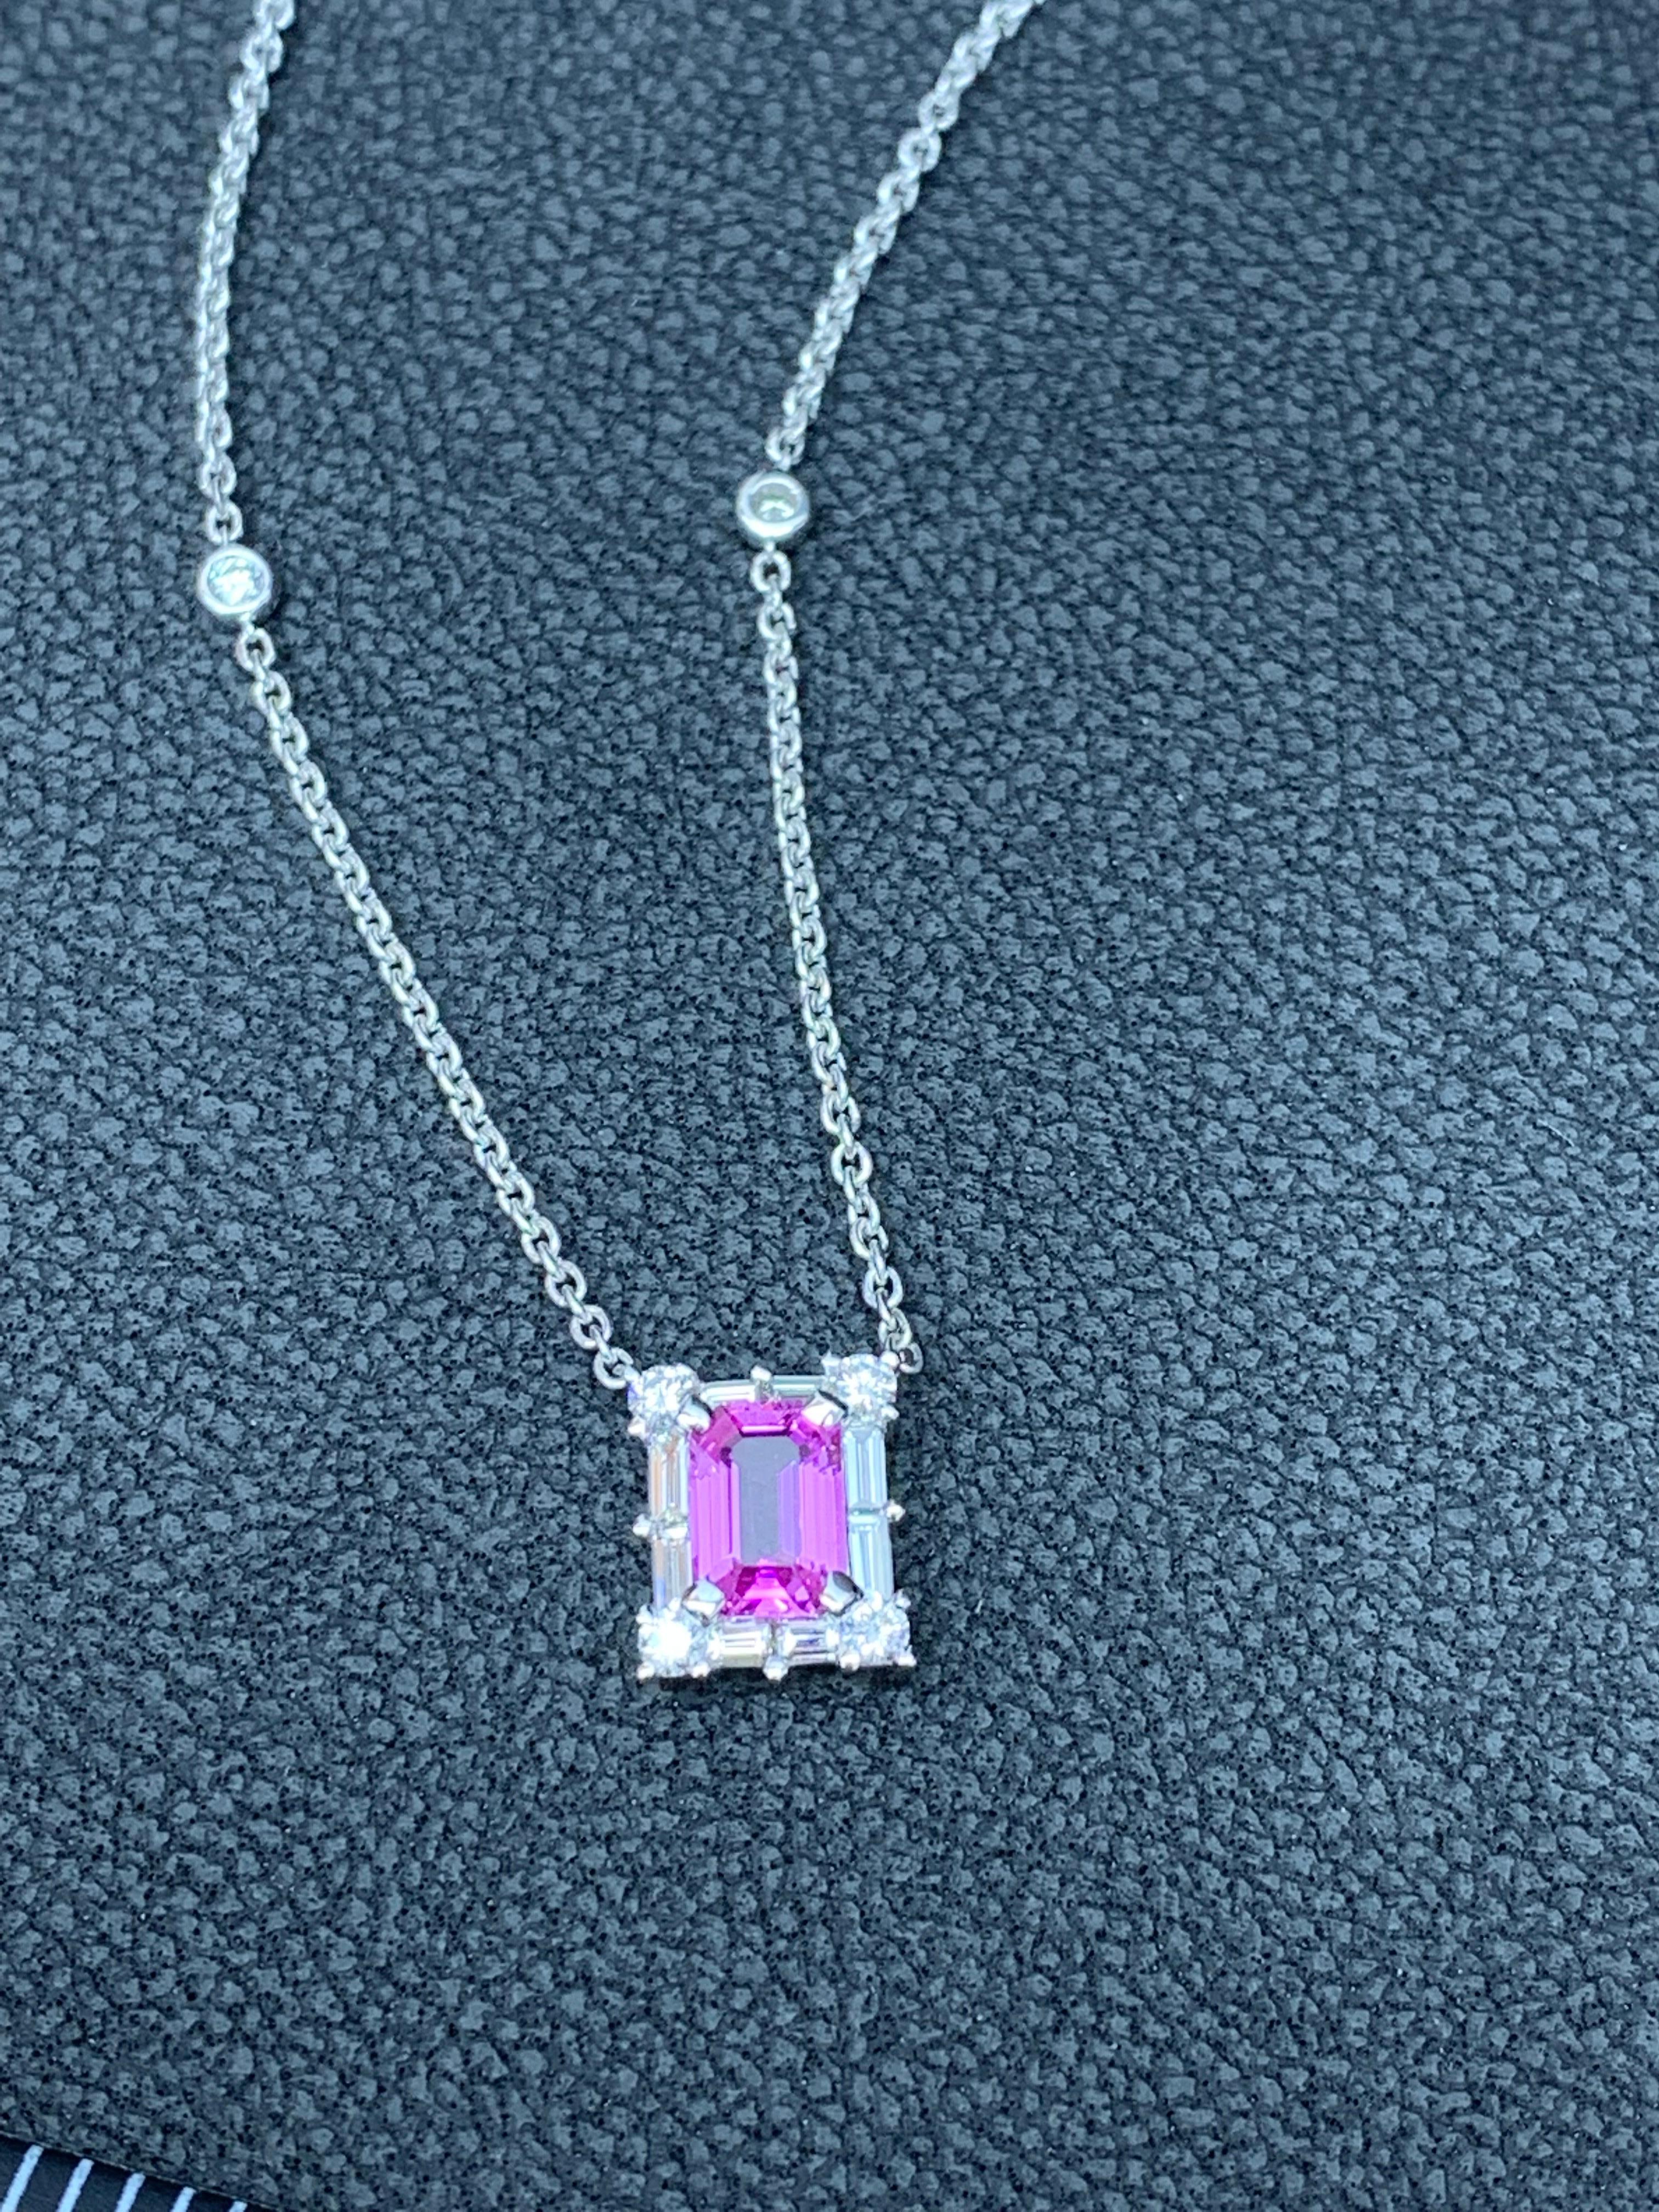 Modern 0.96 Carat Emerald Cut Pink Sapphire Diamond Pendant Necklace in 18K White Gold For Sale